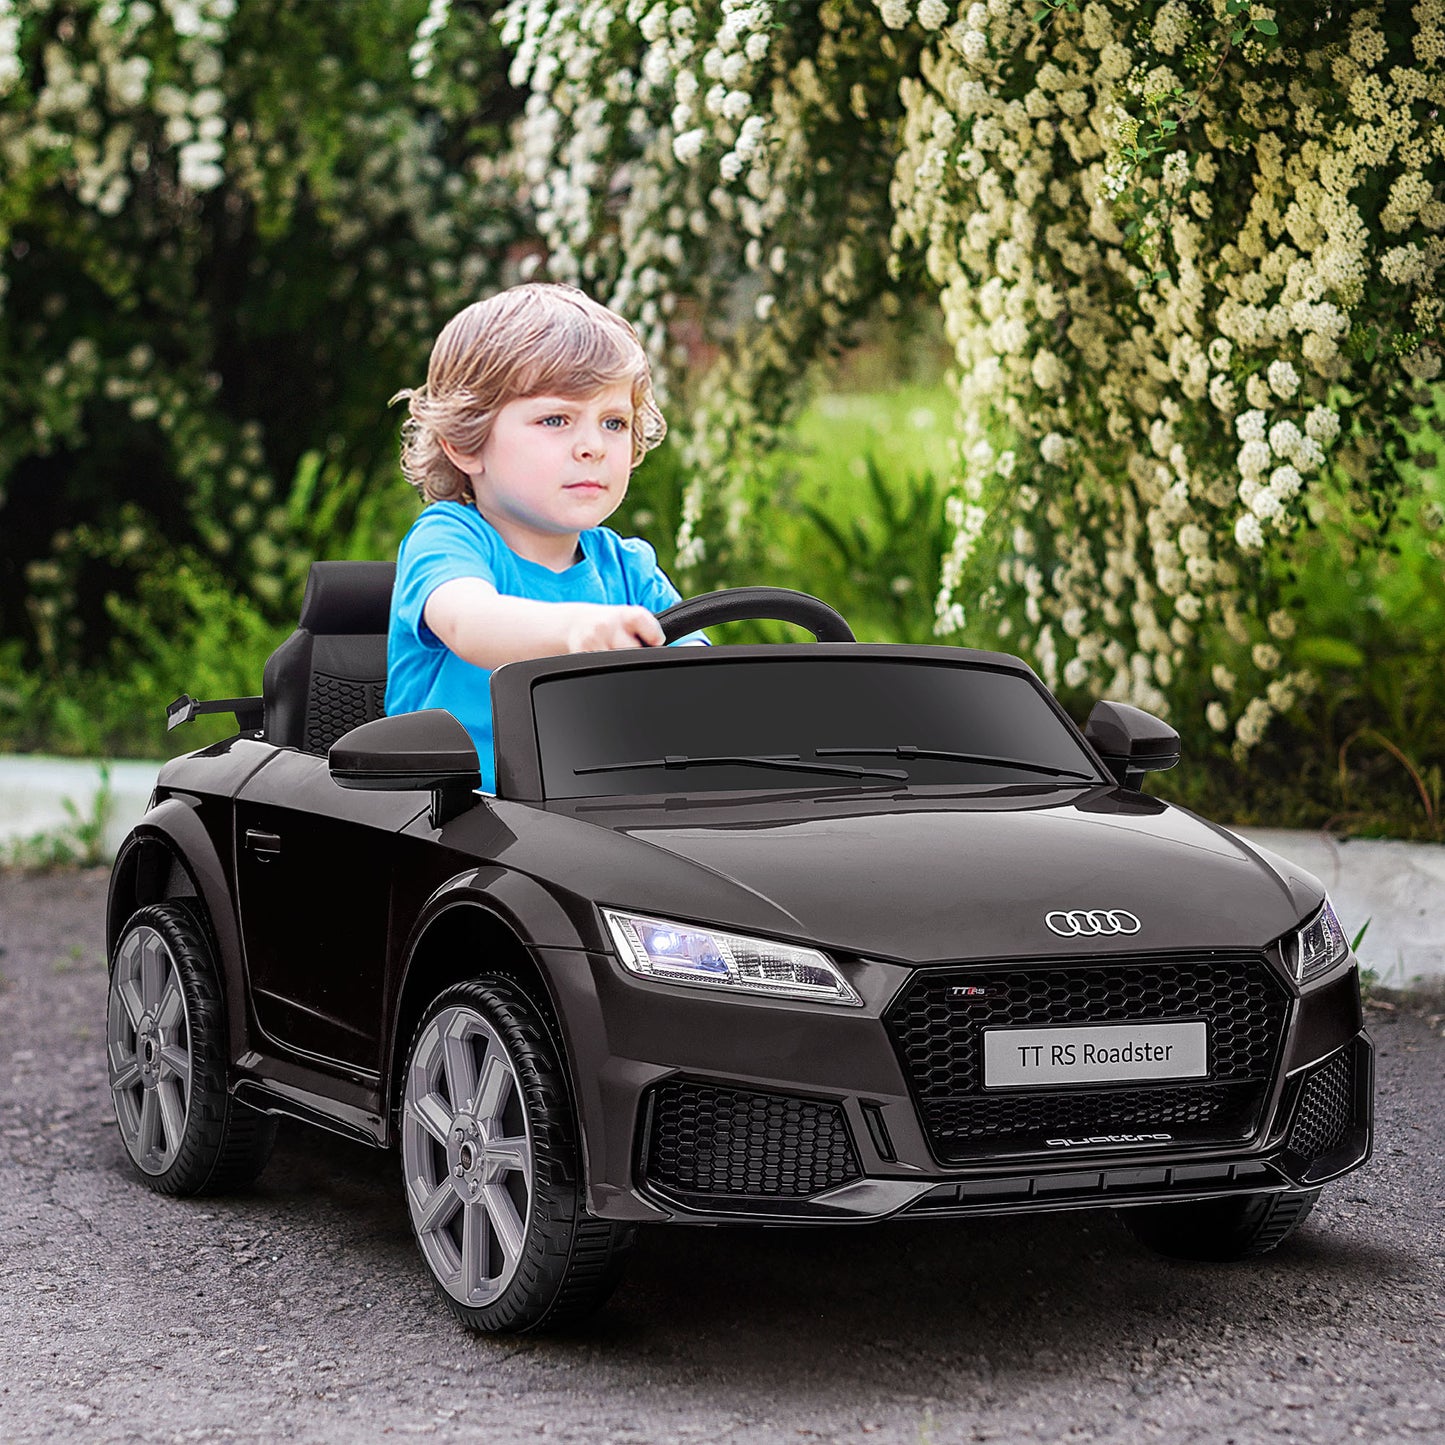 Aosom 6V Kids Electric Ride On Car, Licensed Audi TT RS with Suspension System and Remote Control, Horn, 5 Songs, Lights, MP3 Player - Black